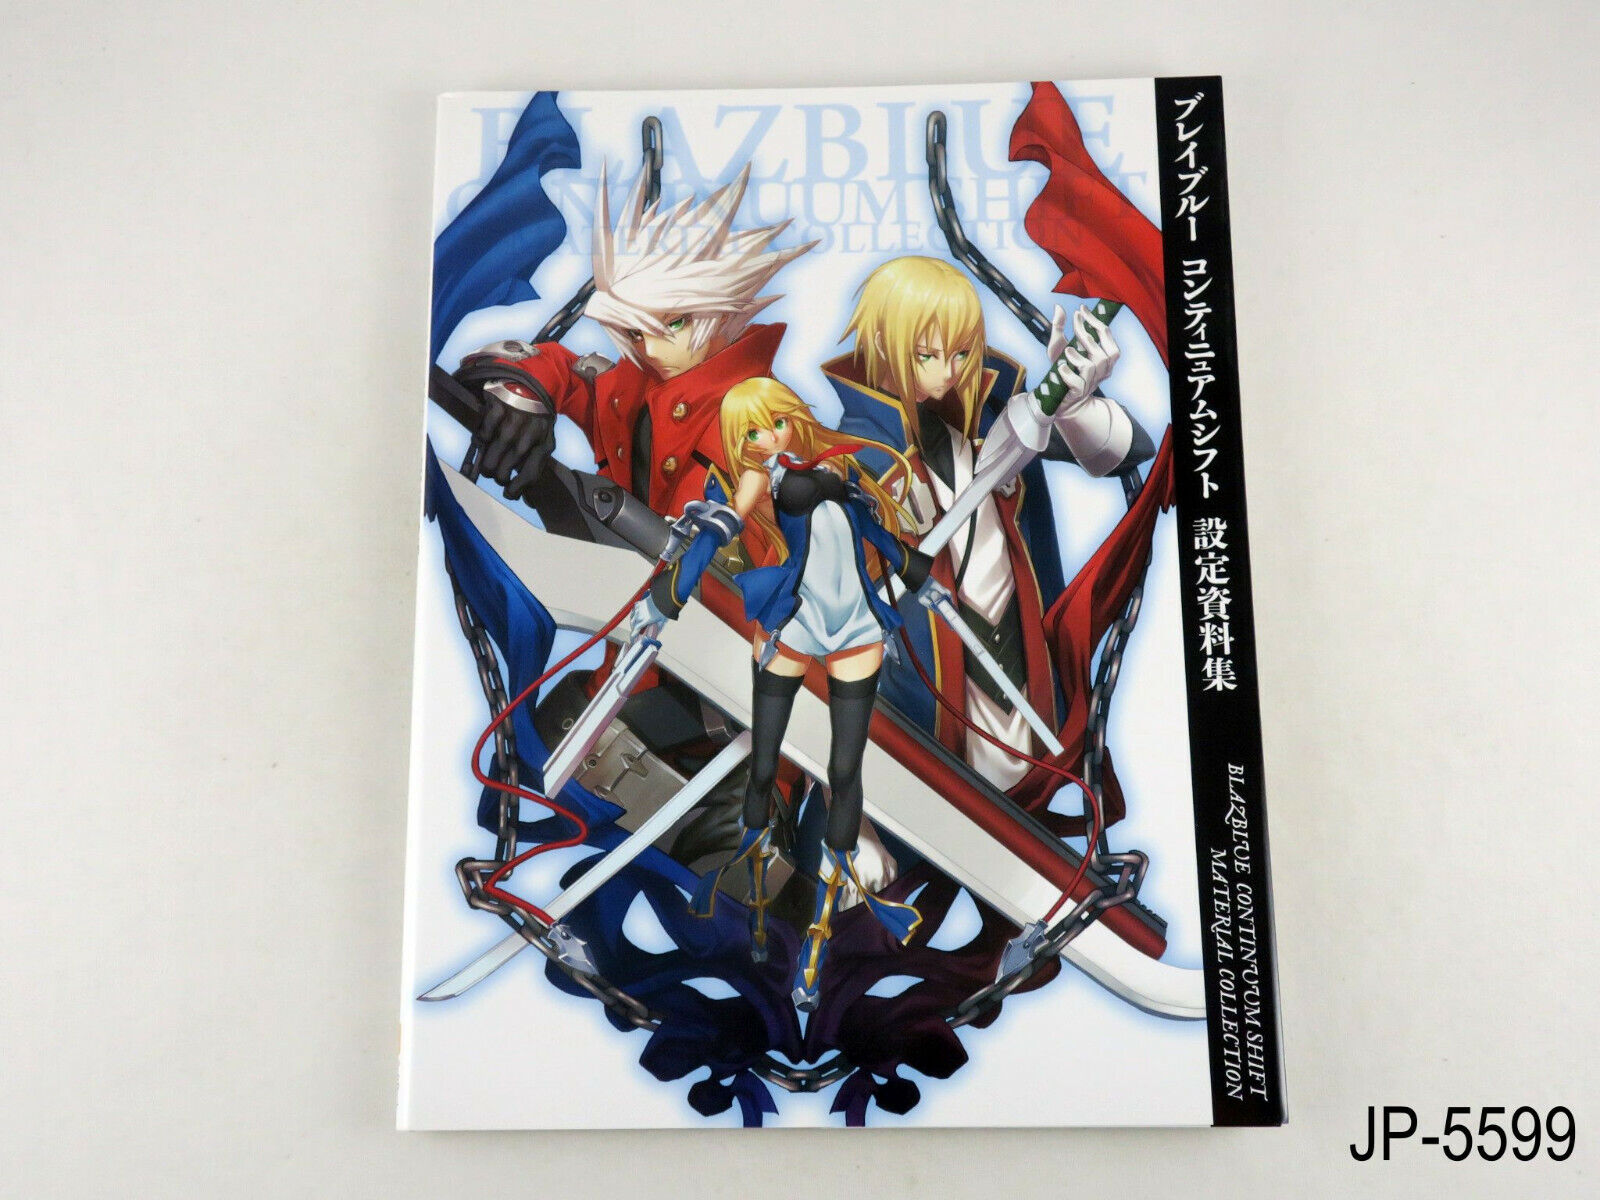 Blazblue Continuum Shift Material Collection Japanese Import Art Book US Seller